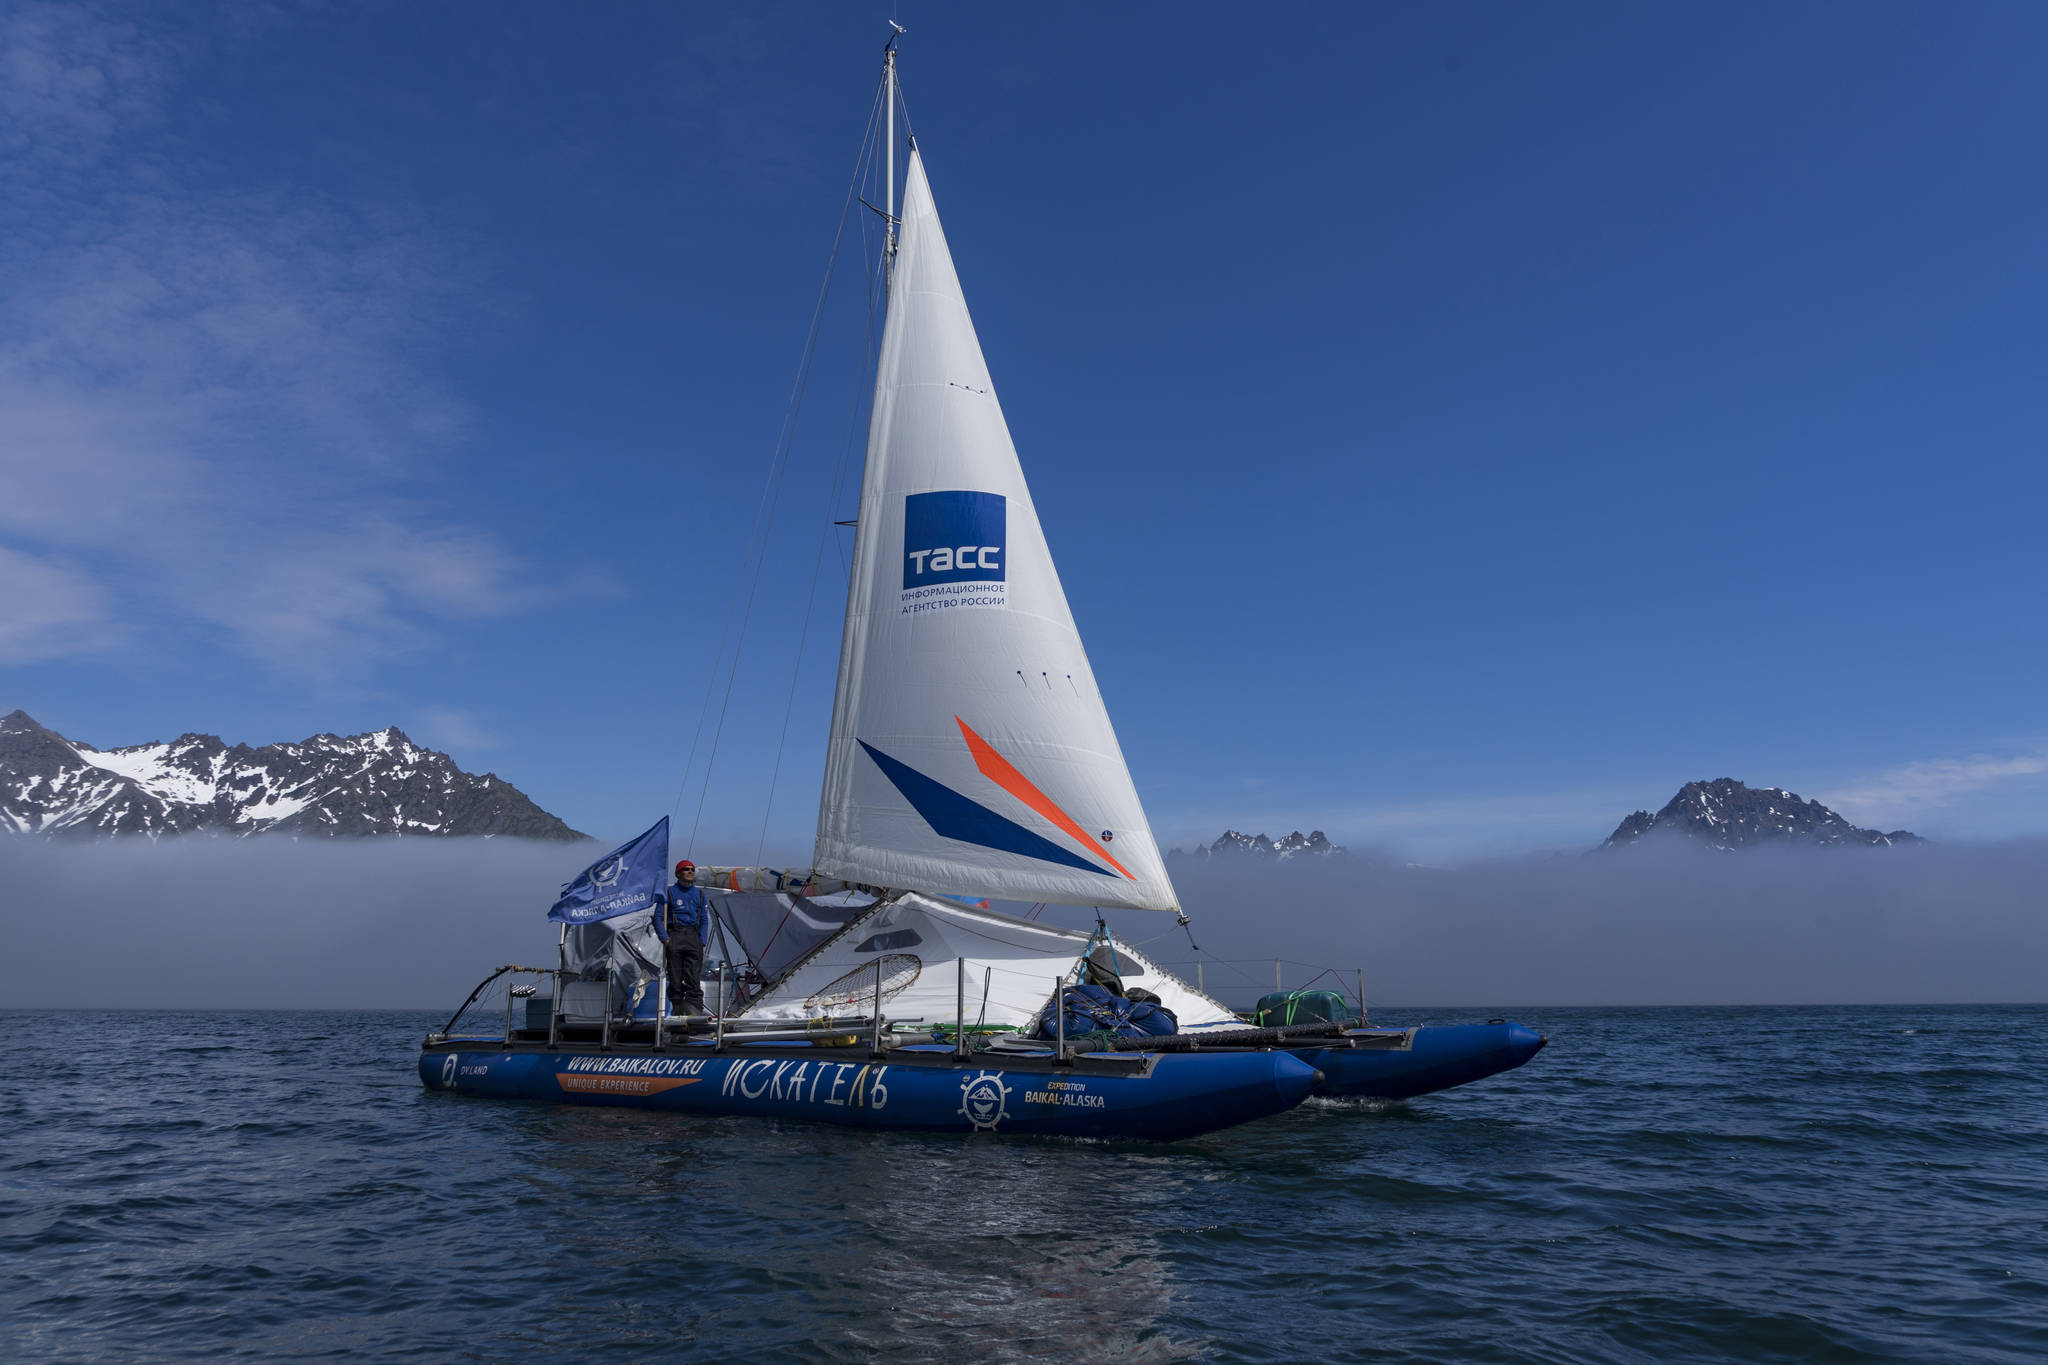 Iskatel at sea earlier this summer. Last Thursday morning, Aug. 30, 2018, the inflatable catamaran arrived at the Homer, Alaska, harbor after a two-year trip from Lake Baikal, Russia, to Homer, arriving Aug. 26. (Photo provided/Baikal-Alaska Expedition)